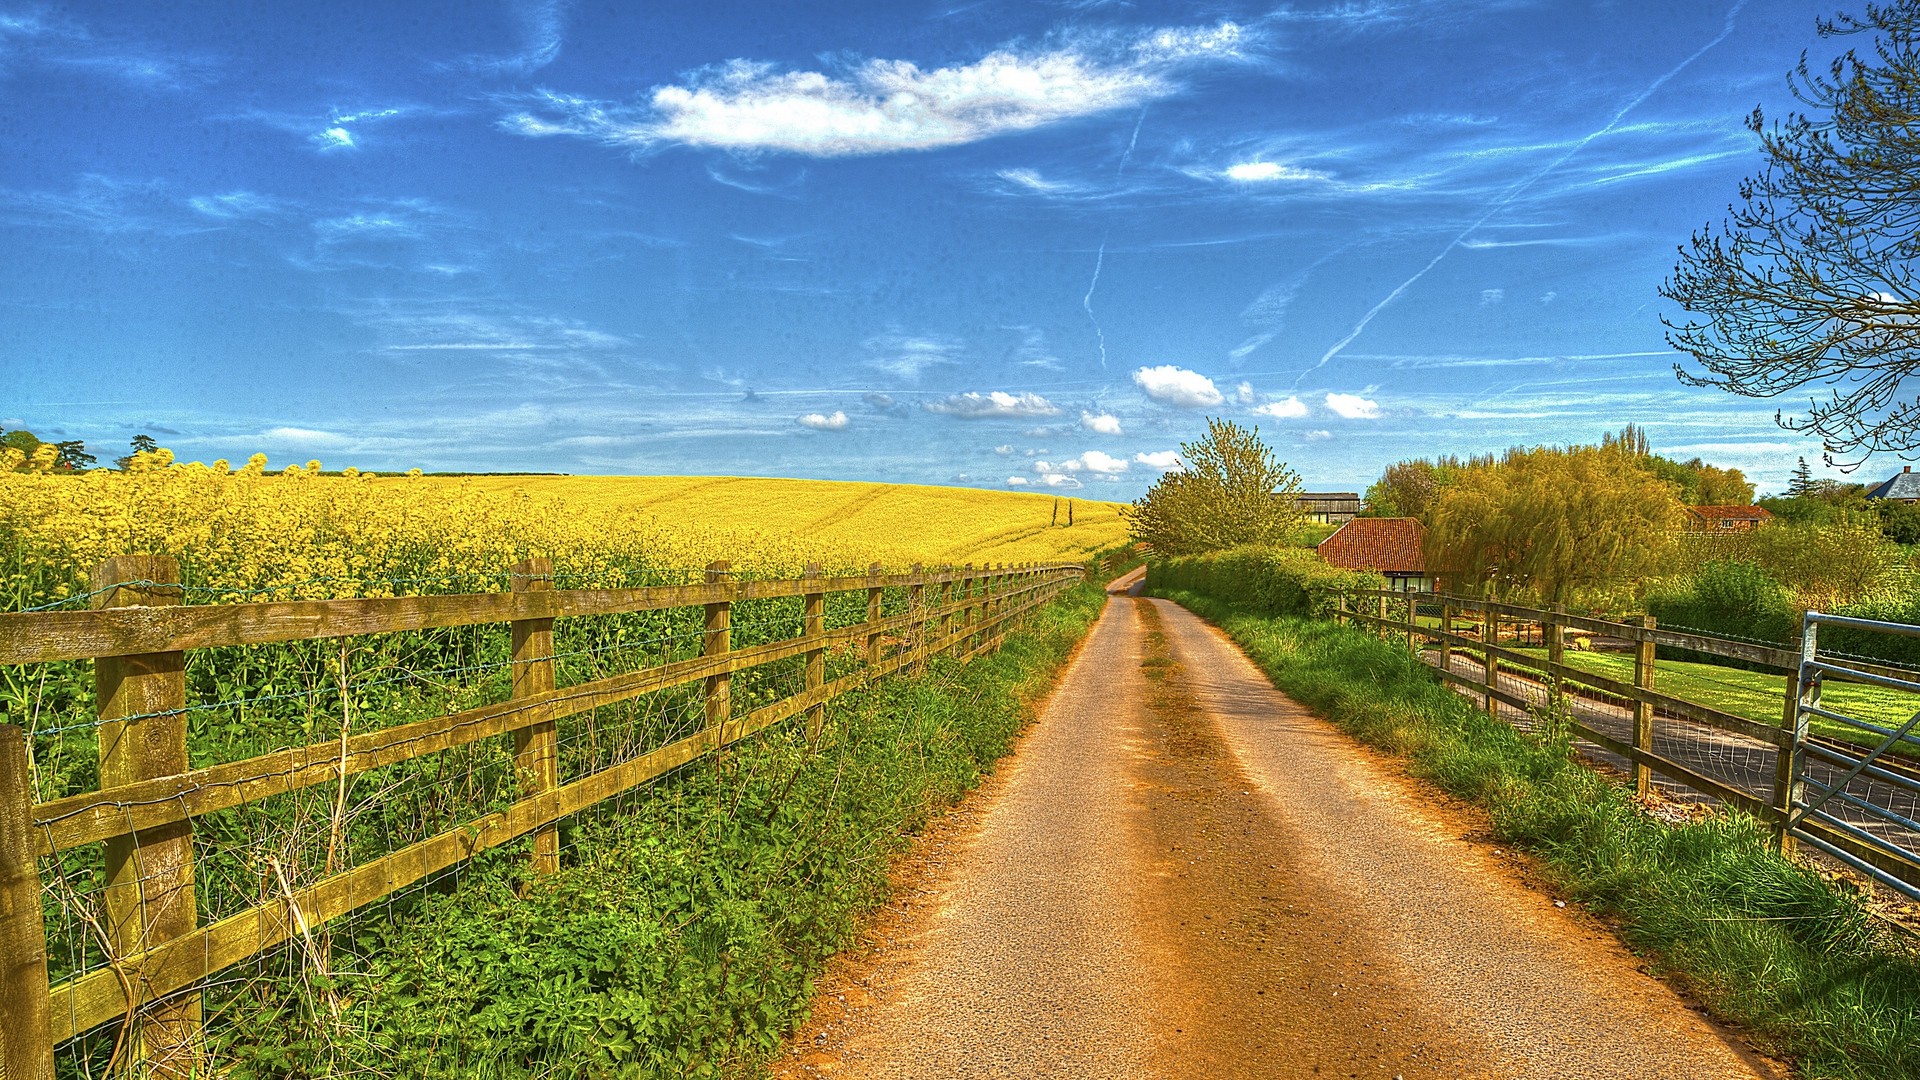 1920x1080 wallpapers: road, field, the fence, home (image)